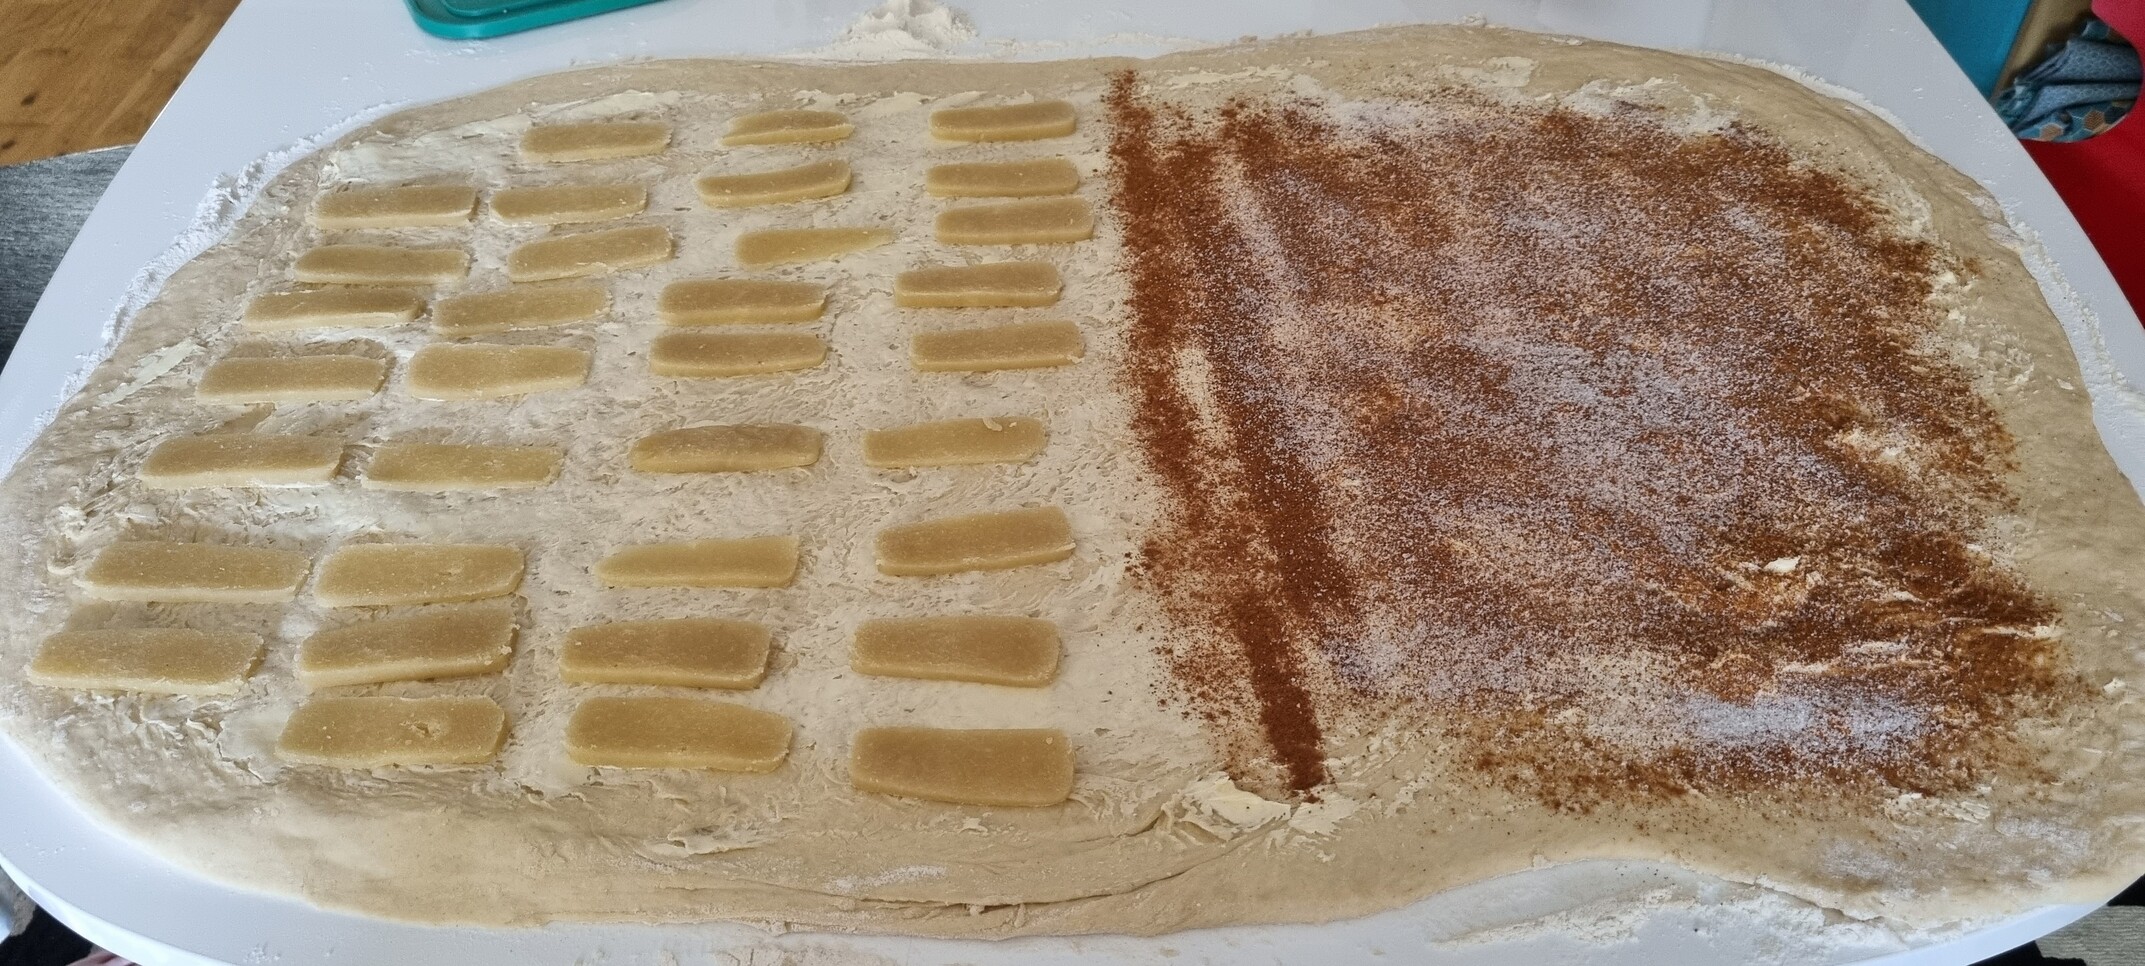 A dough spread out, ready to be rolled up. On the left there's one topping and on the right another. 